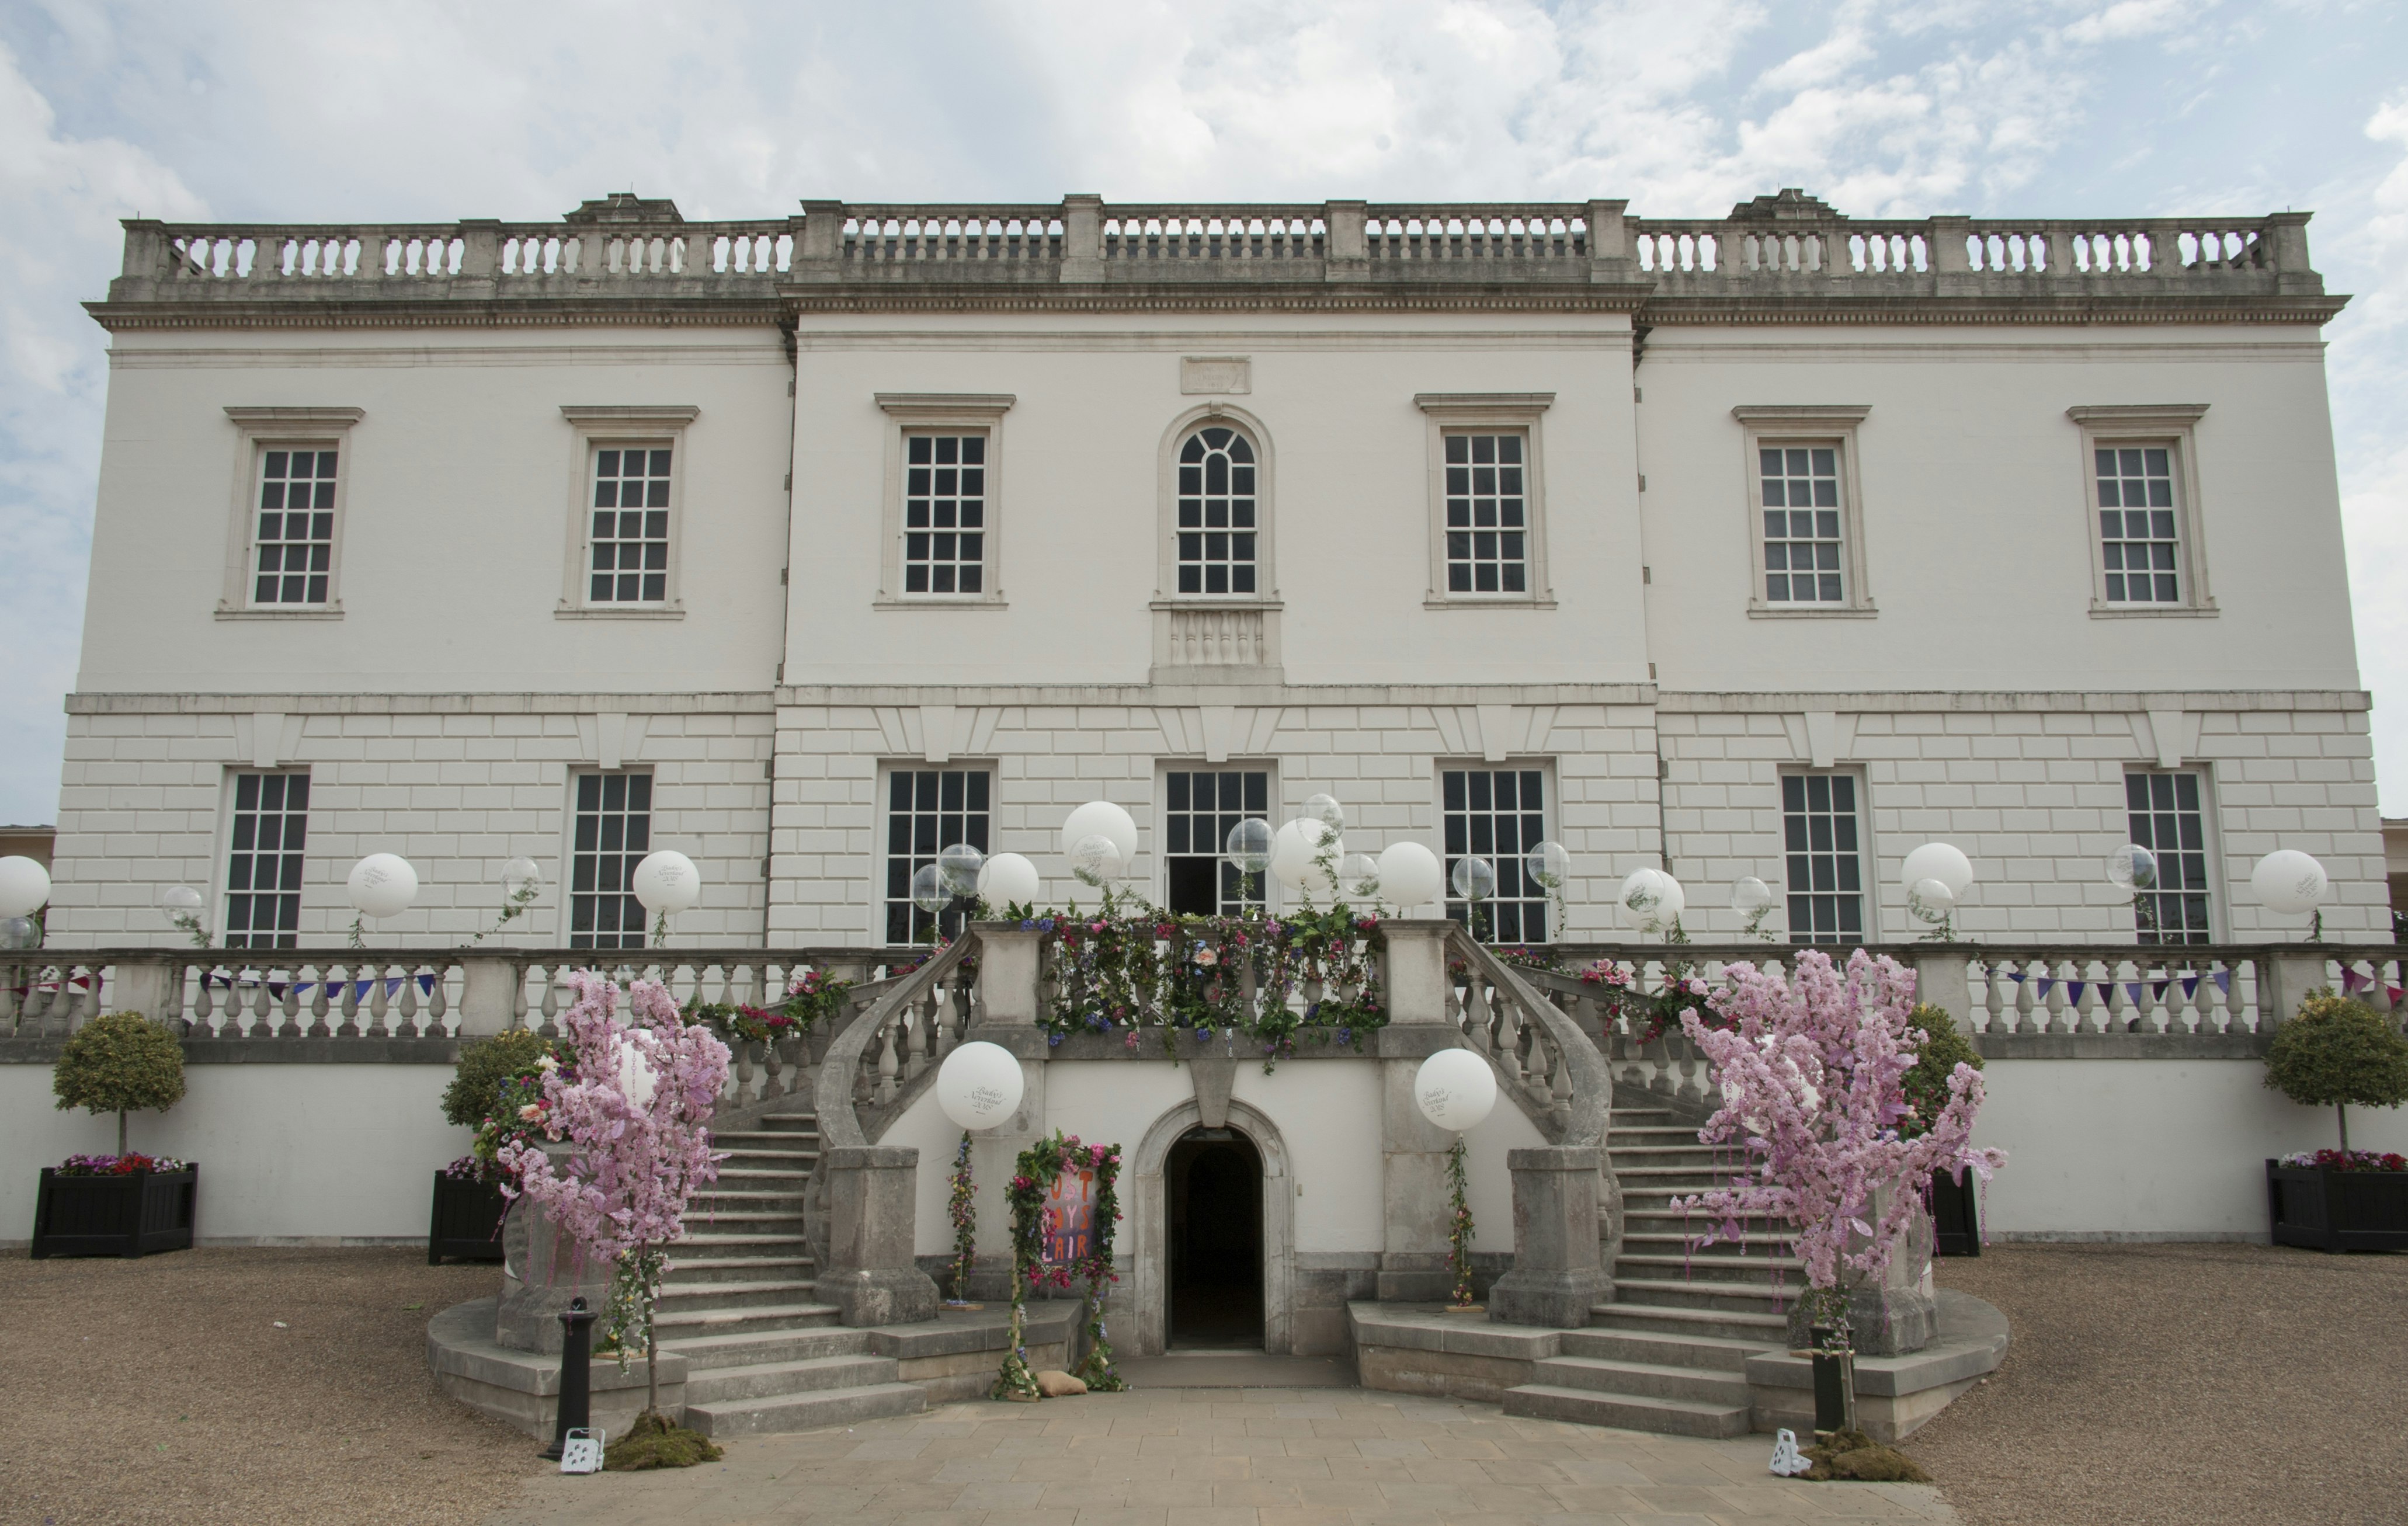 Away Day Venues in London - The Queen's House